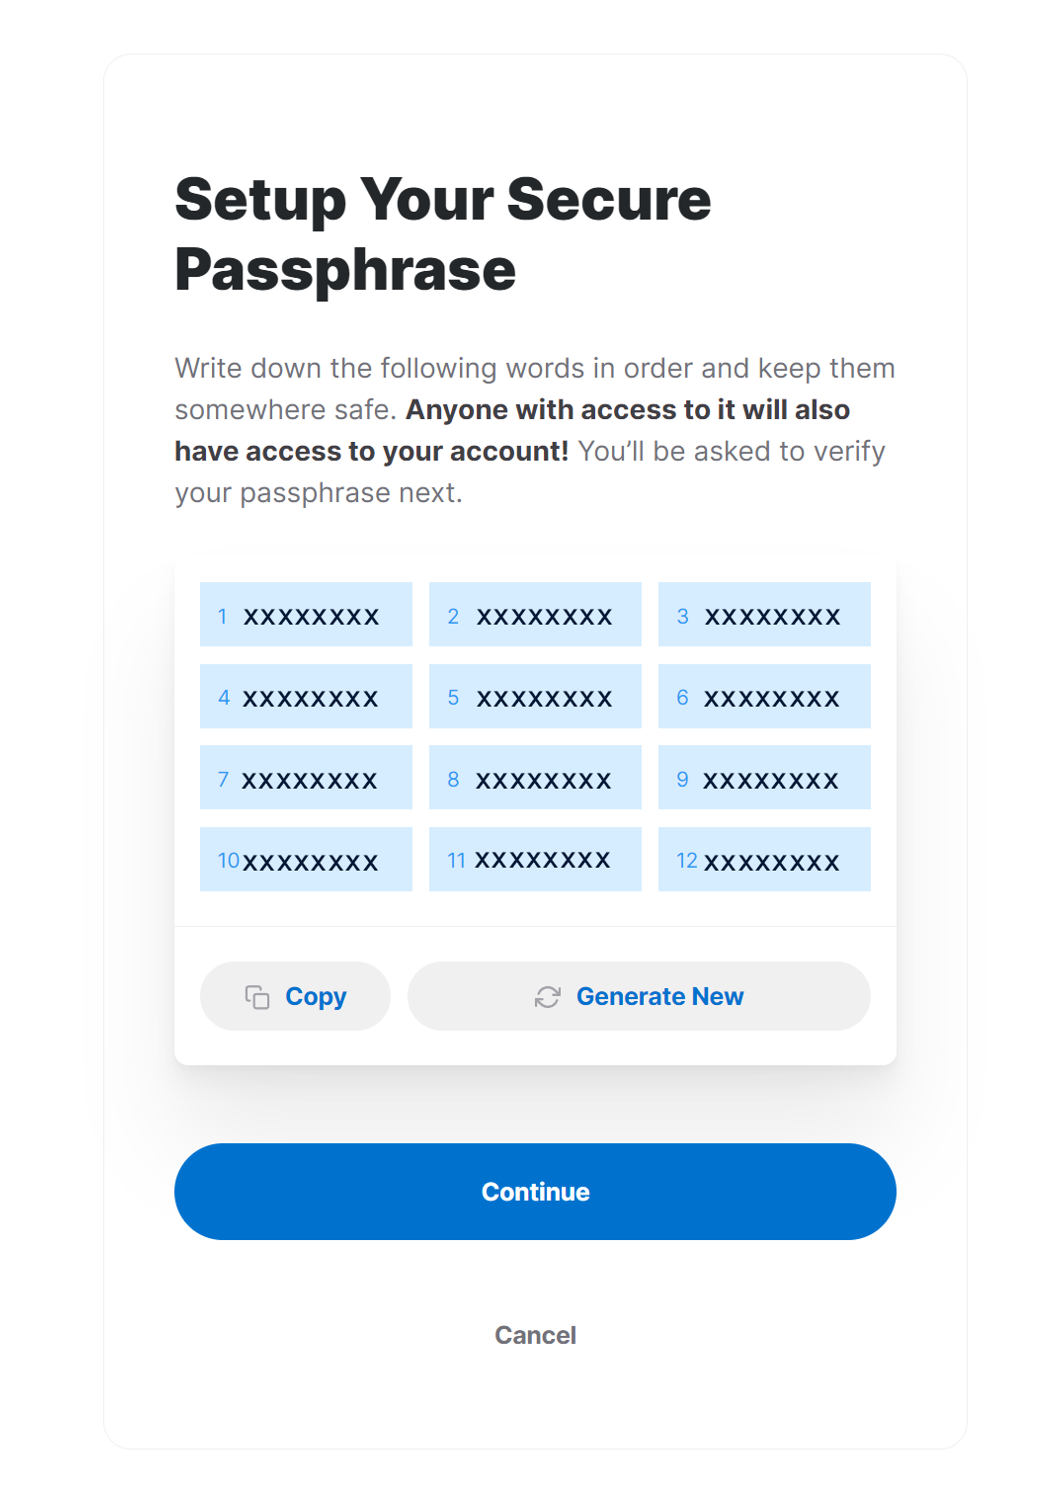 Setup Your Secure Passphrase Page on NEAR with 12 secret words.